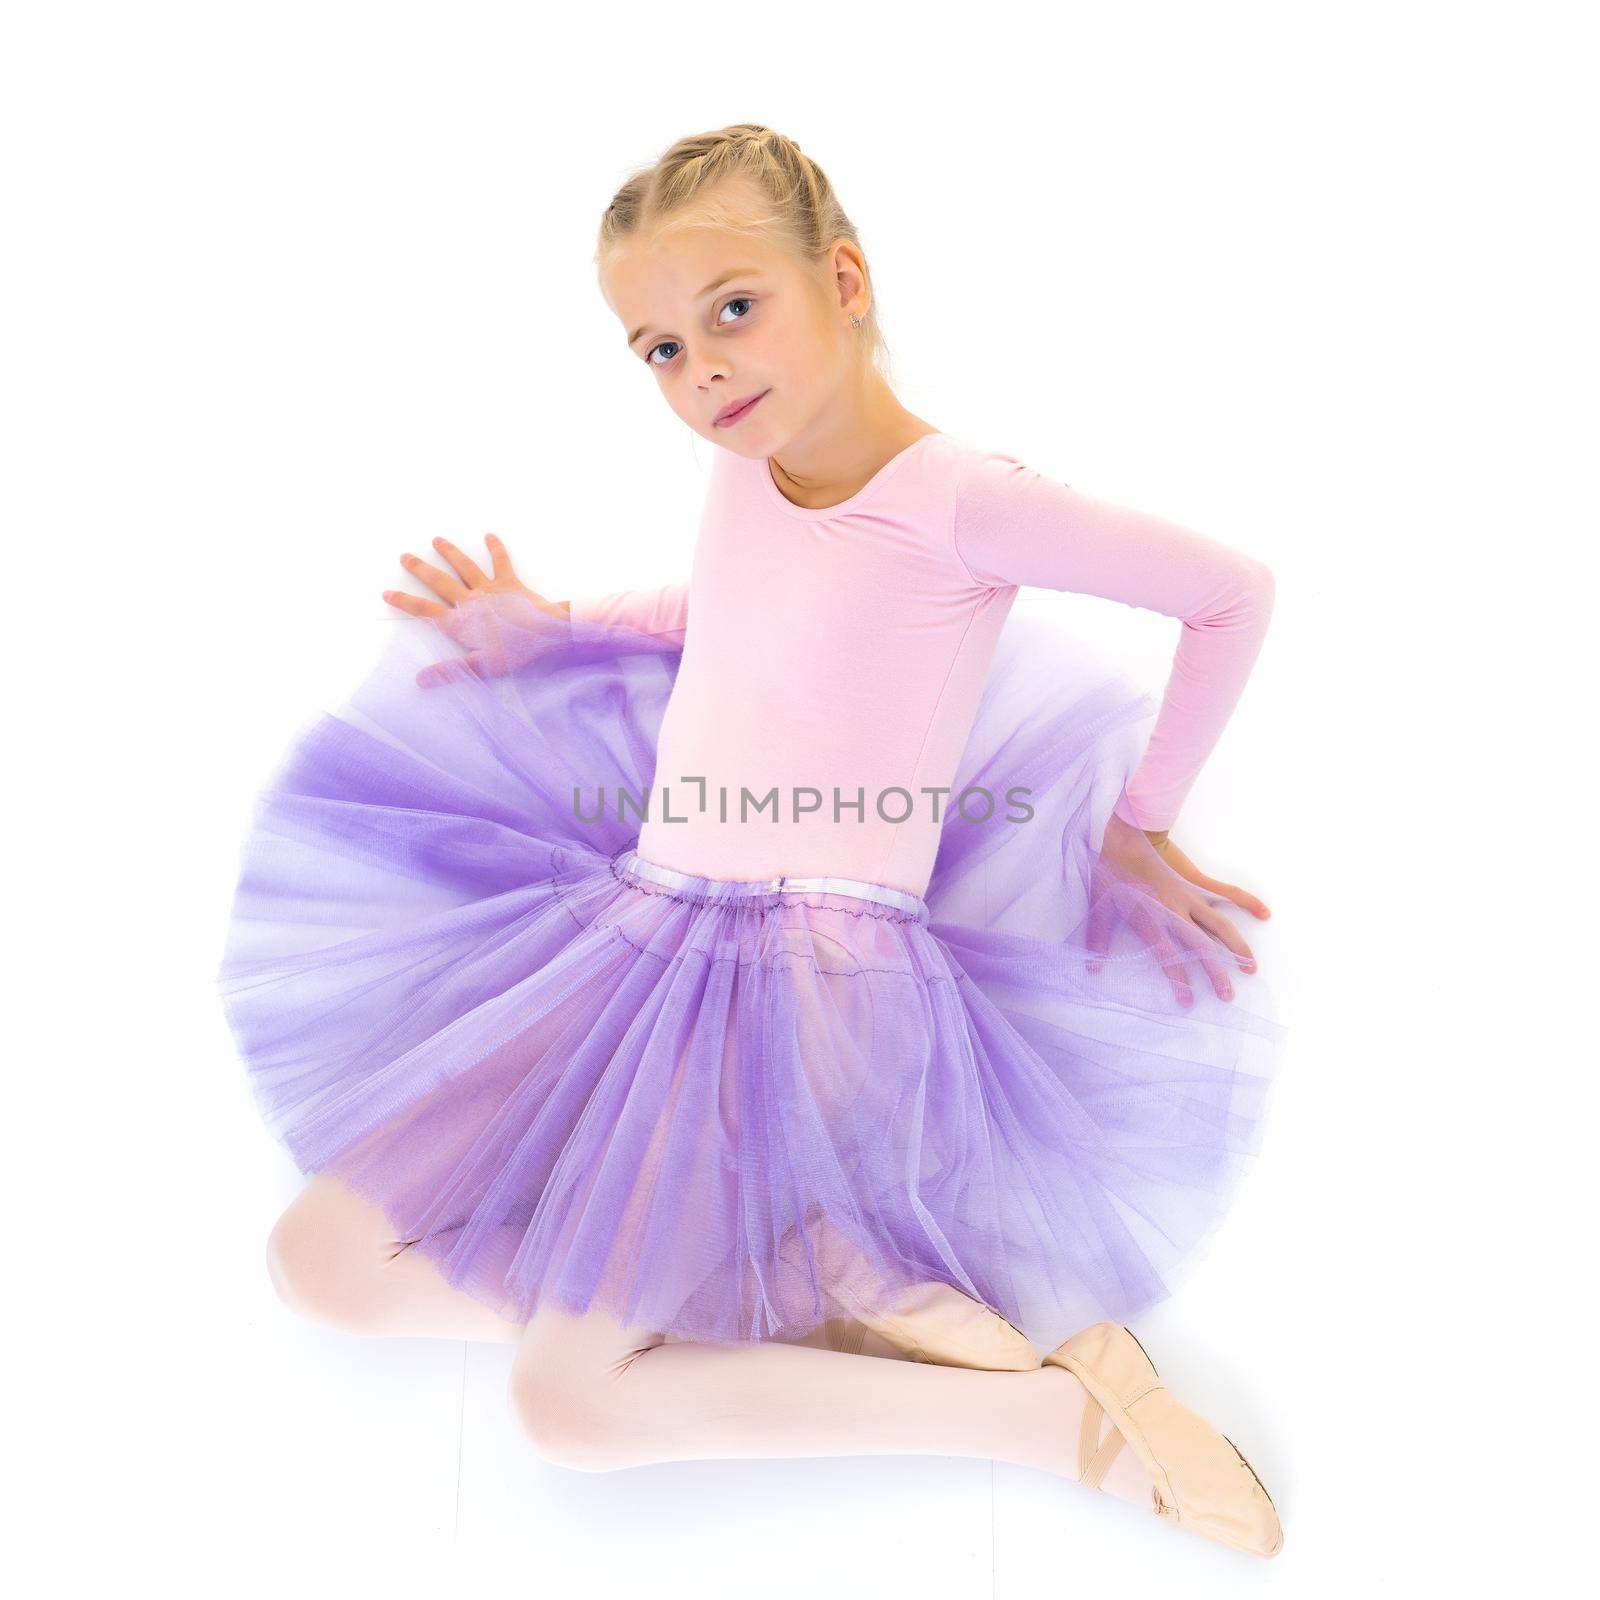 Charming little girl ballet dancer performing ballet poses on the floor in the studio on a white background.Isolated.